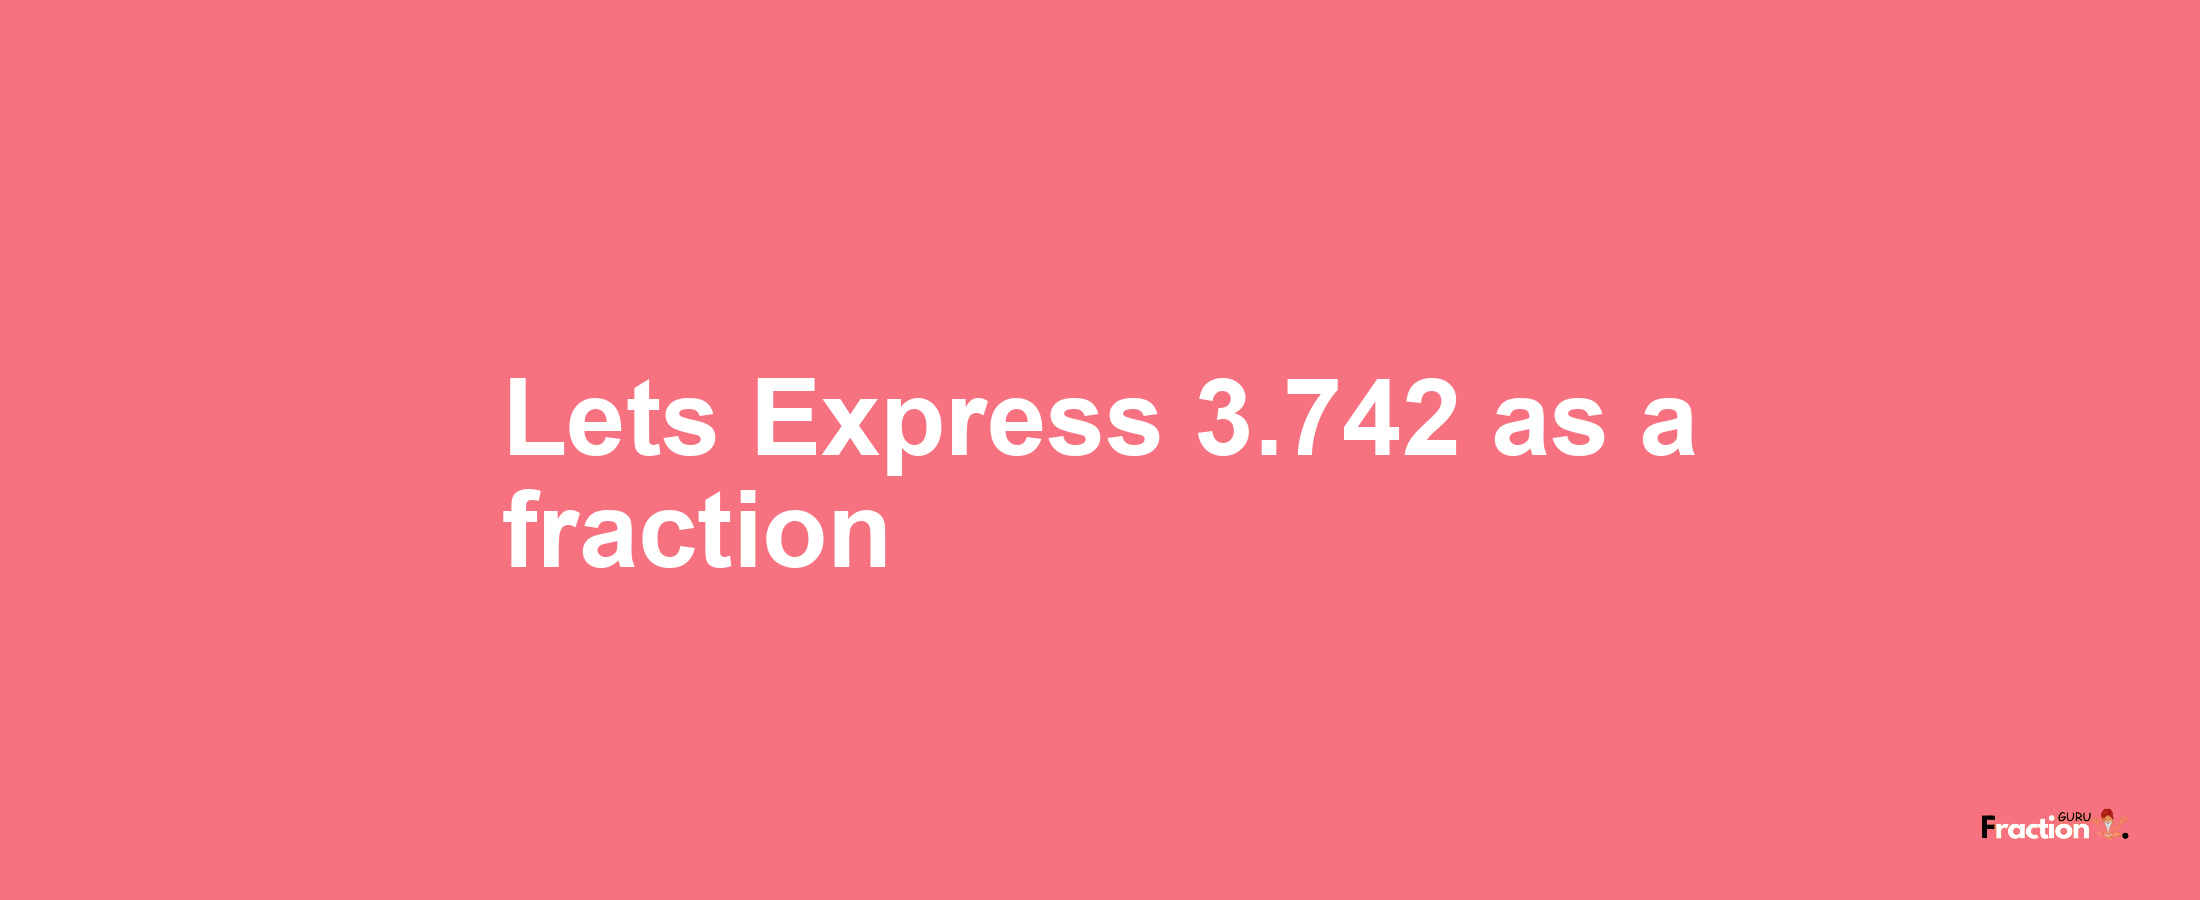 Lets Express 3.742 as afraction